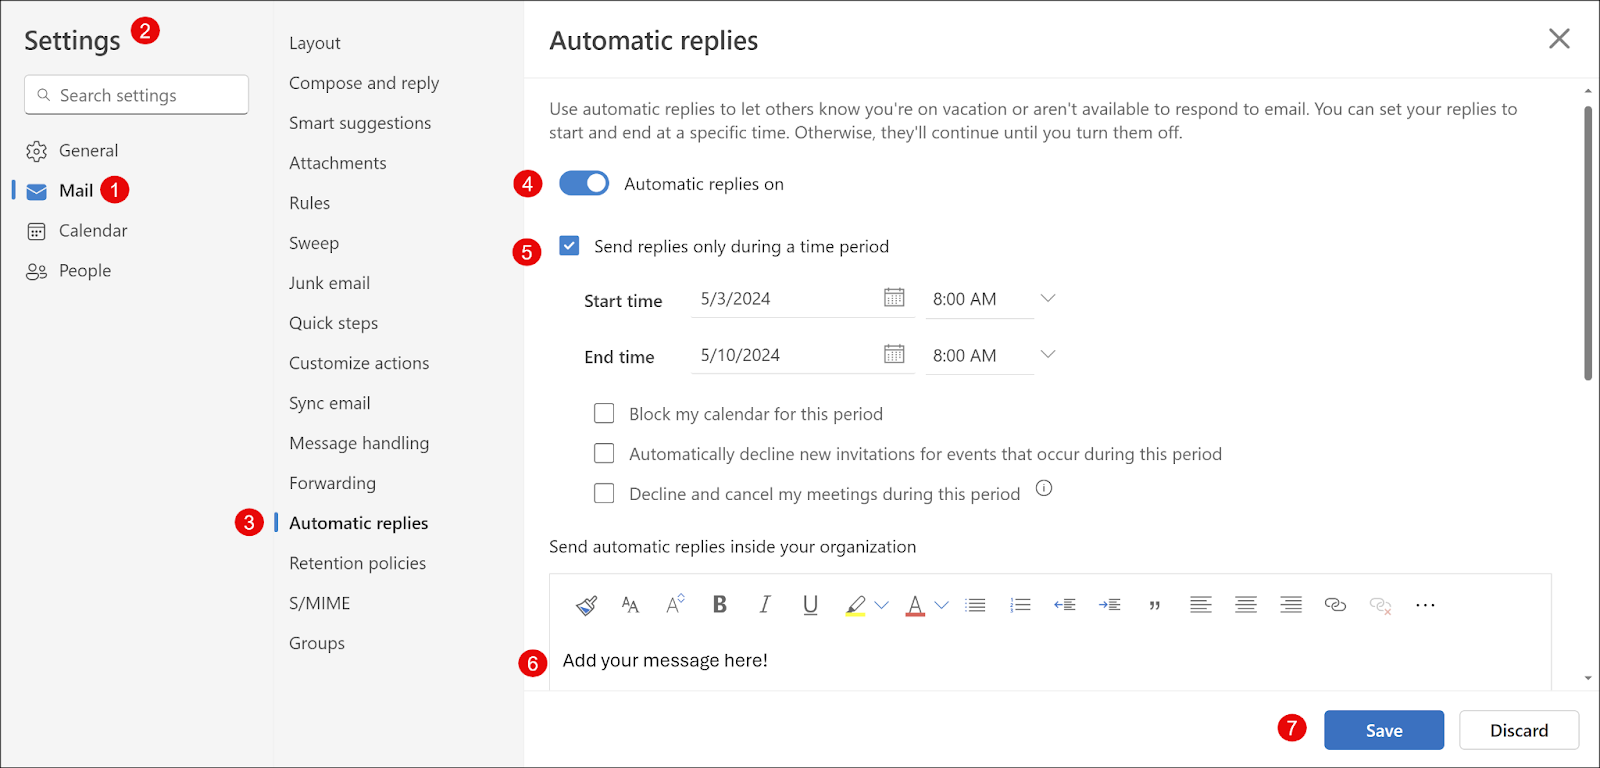 The UI to set up Outlook messages.